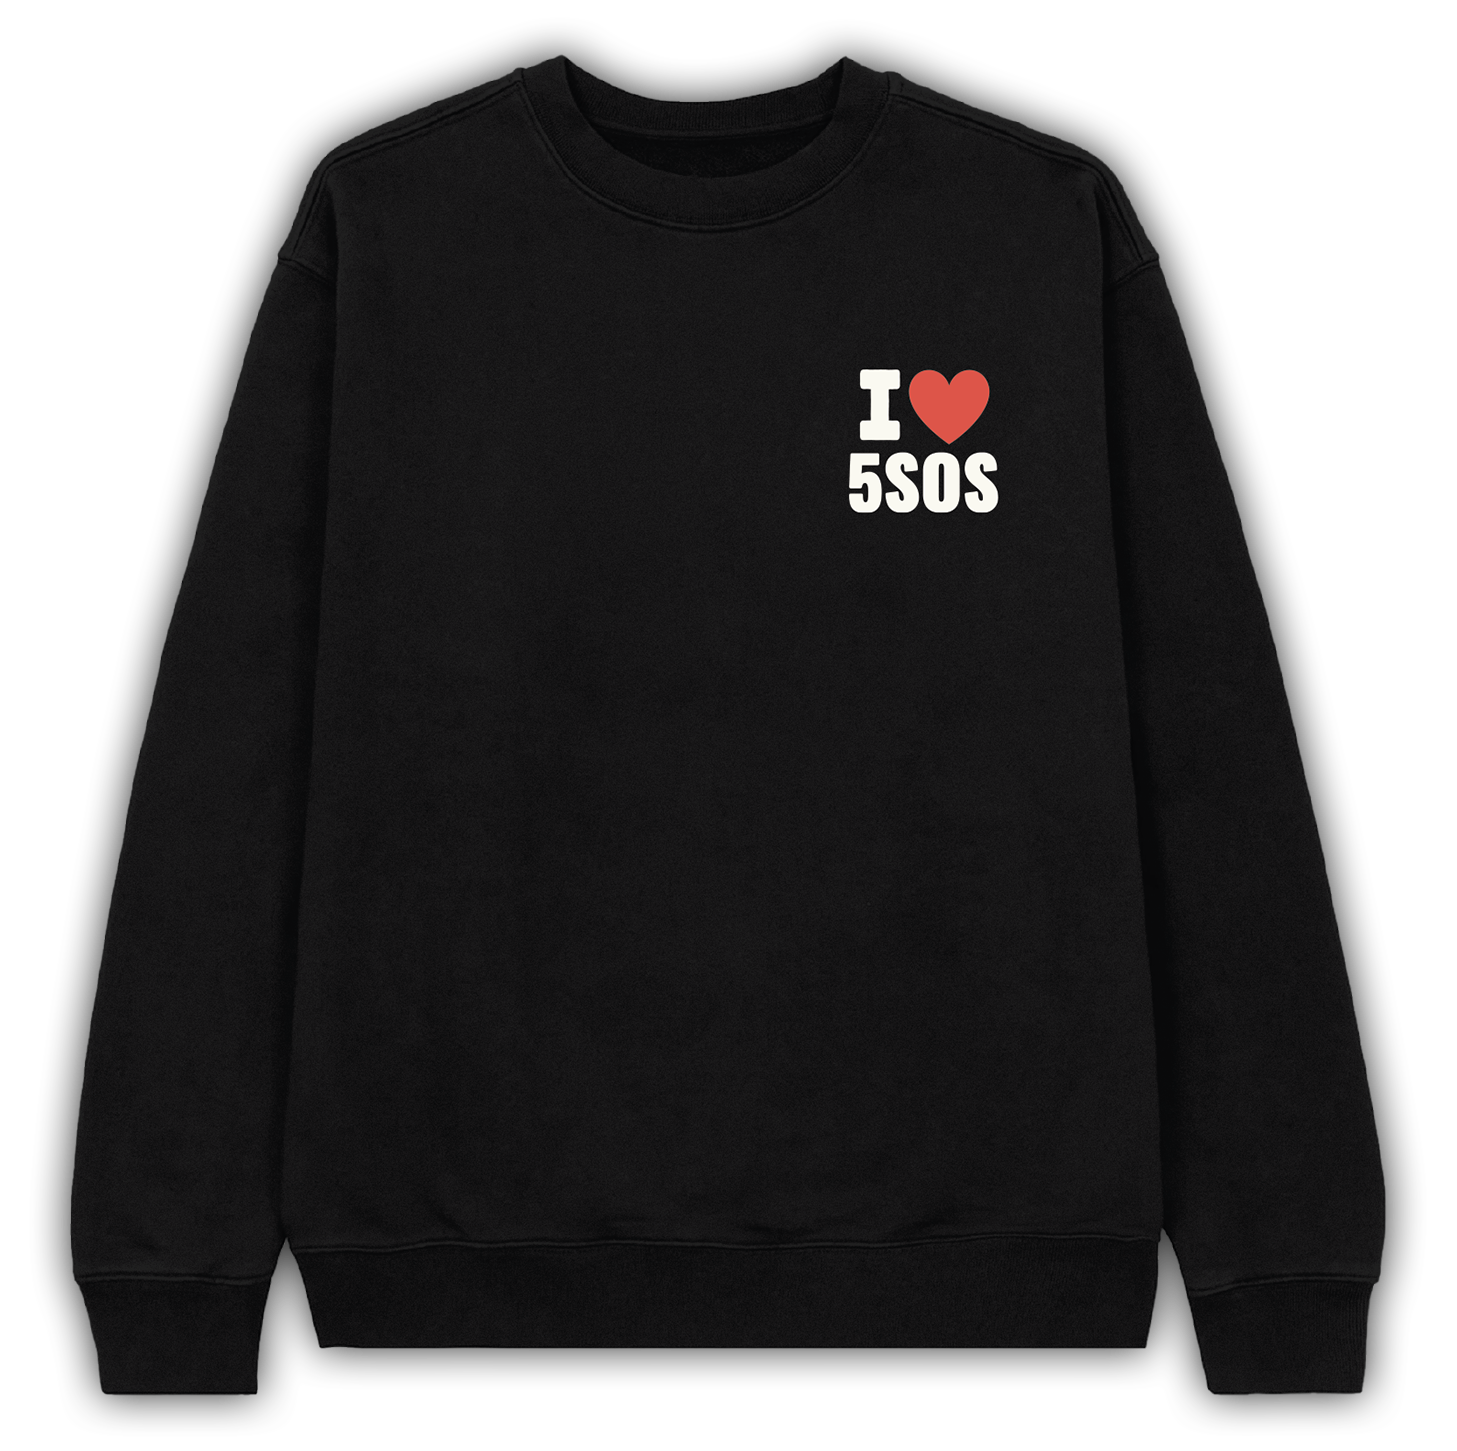 Official 5SOS Merchandise – Official 5SOS Store - US